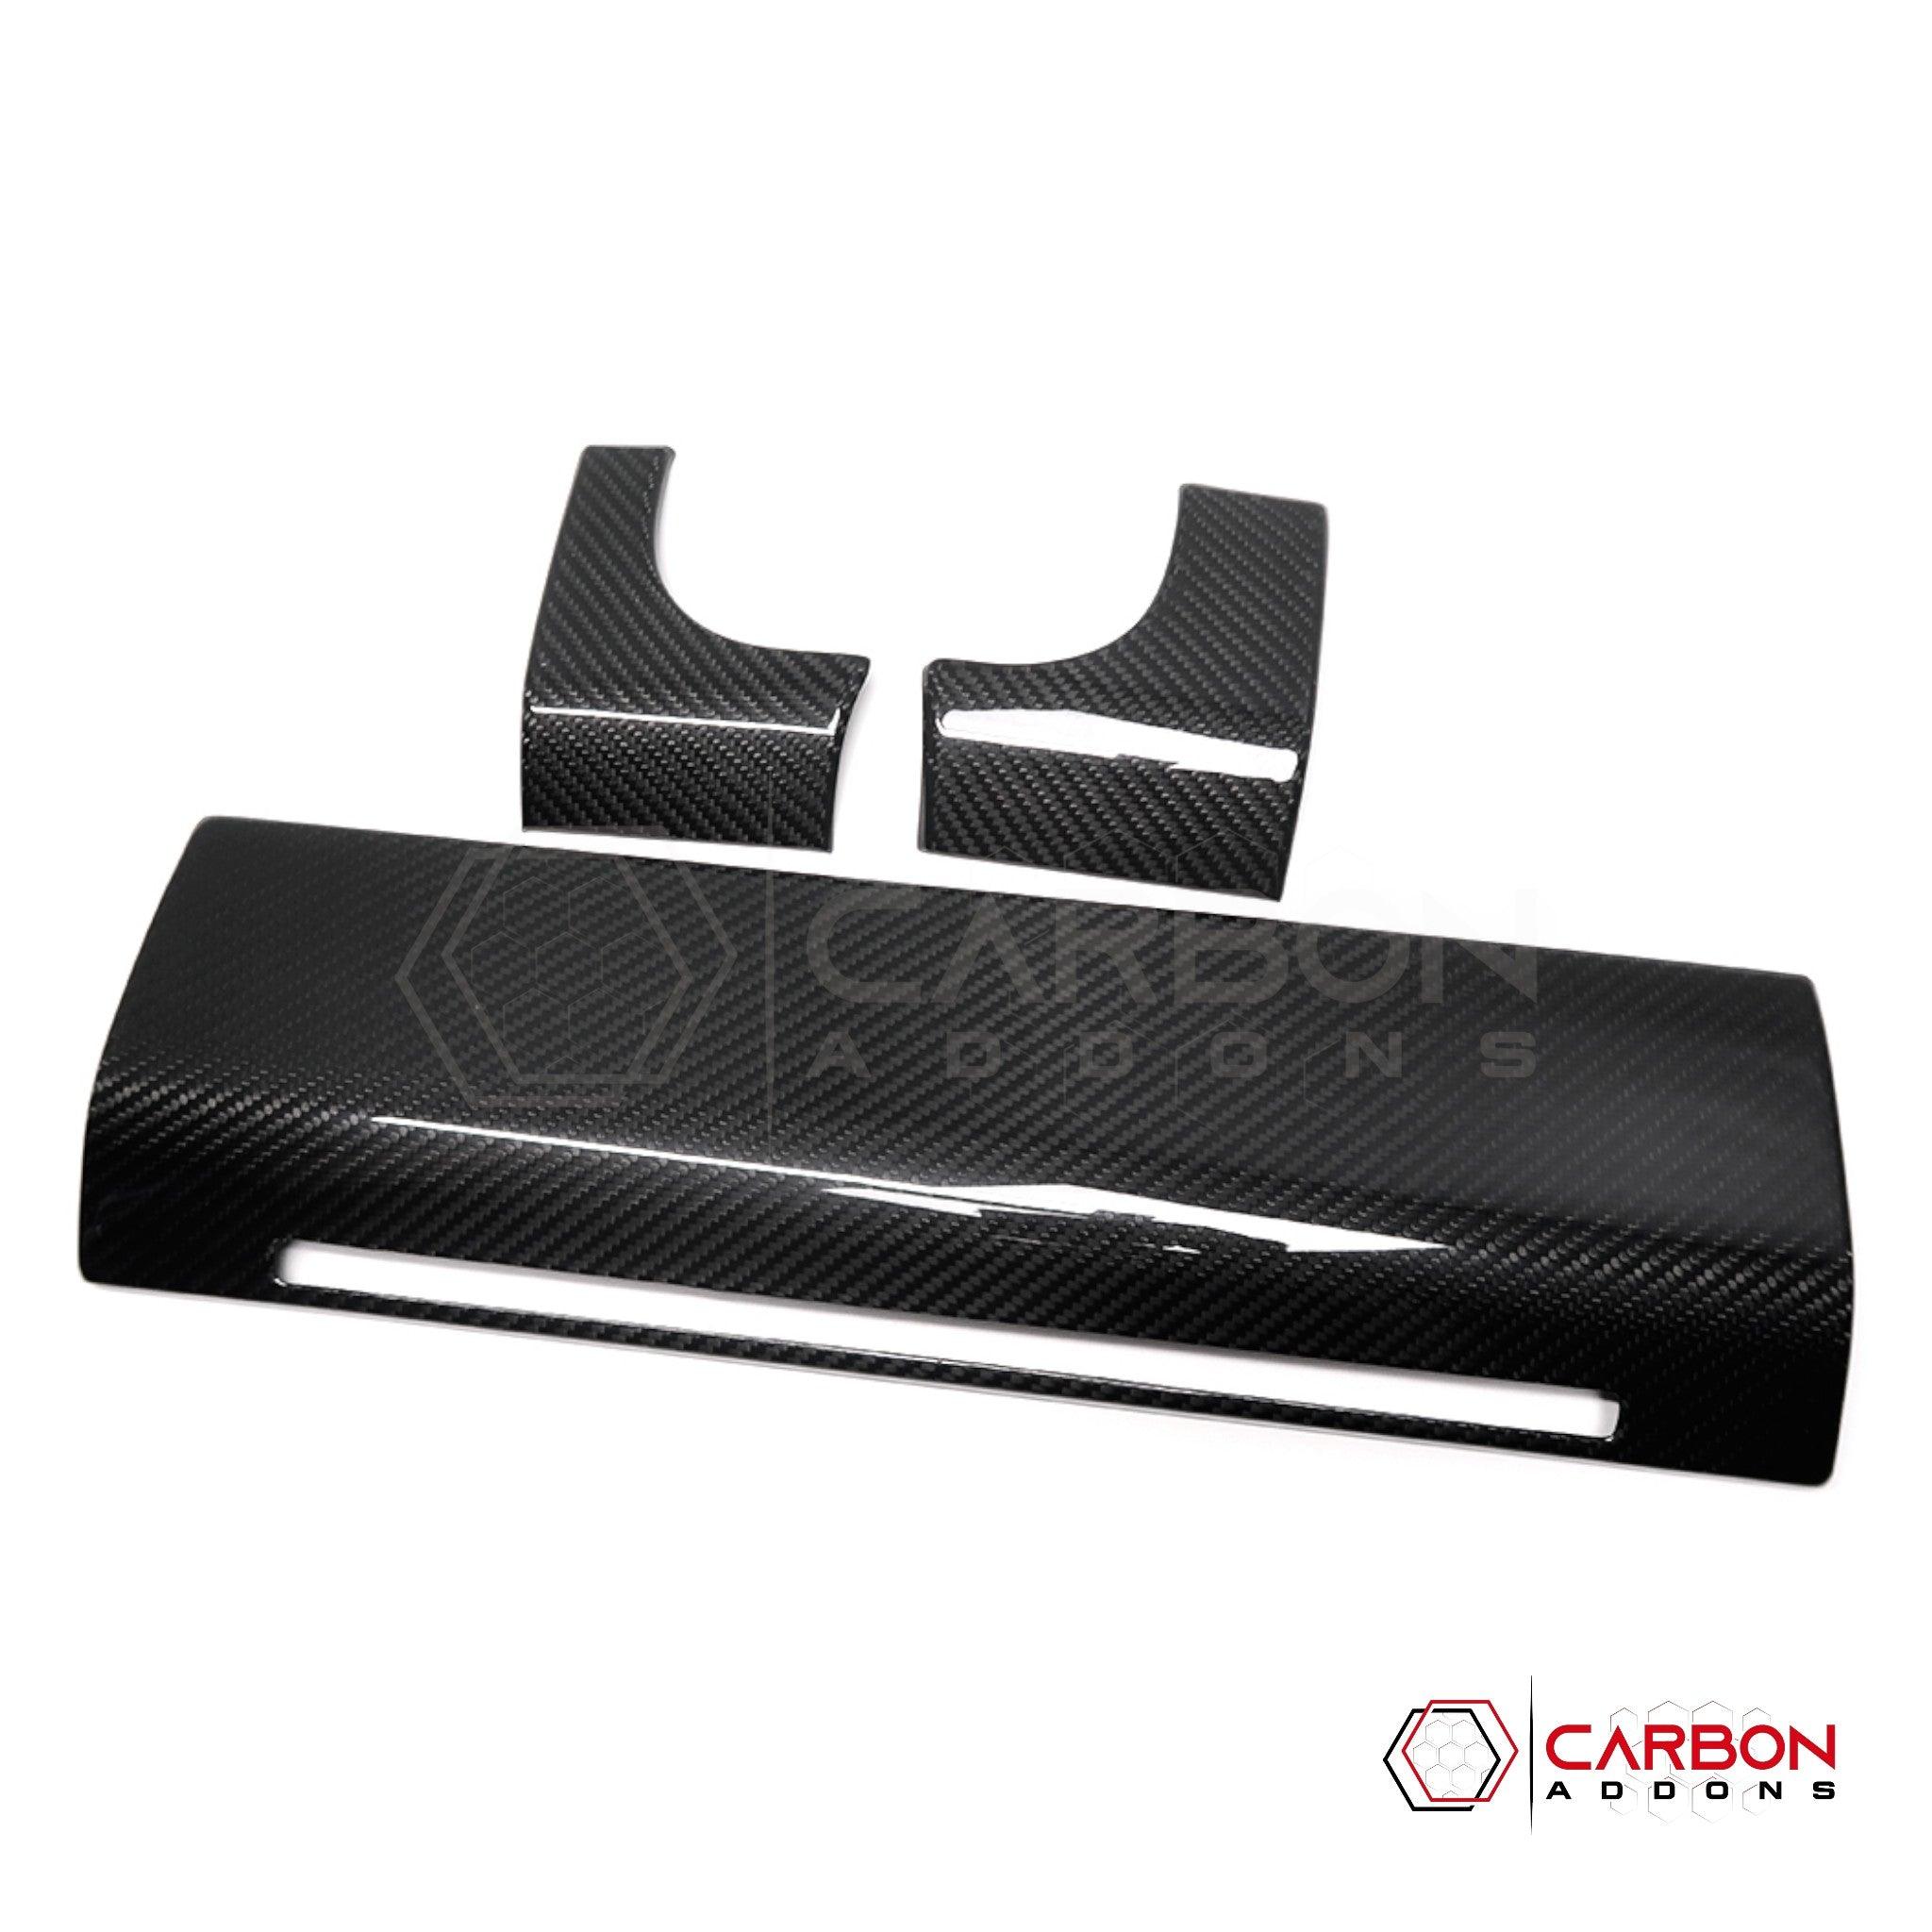 [Coming Soon] Ford F150 2021-Present Dashboard and Glove Box Hard Carbon Fiber Cover - carbonaddons Carbon Fiber Parts, Accessories, Upgrades, Mods